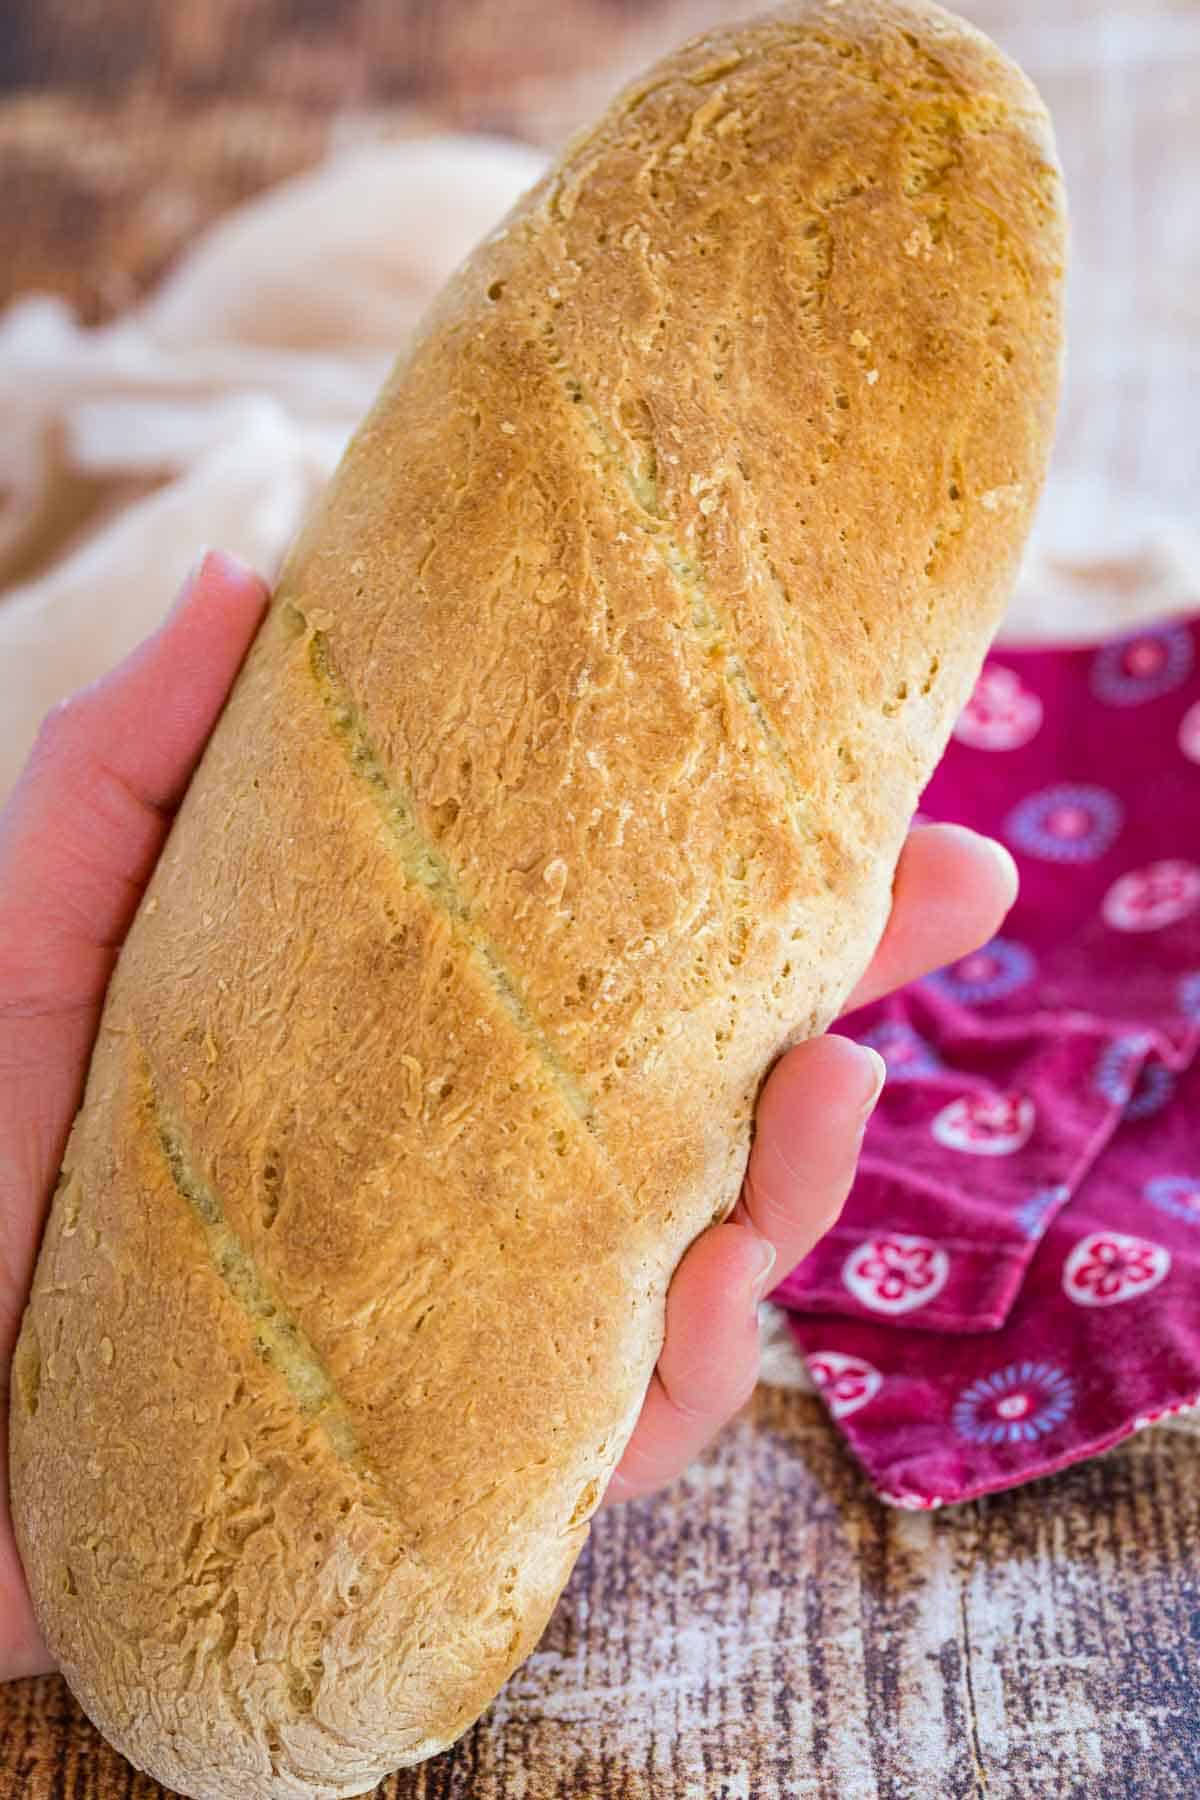 A hand holding a homemade French baguette.